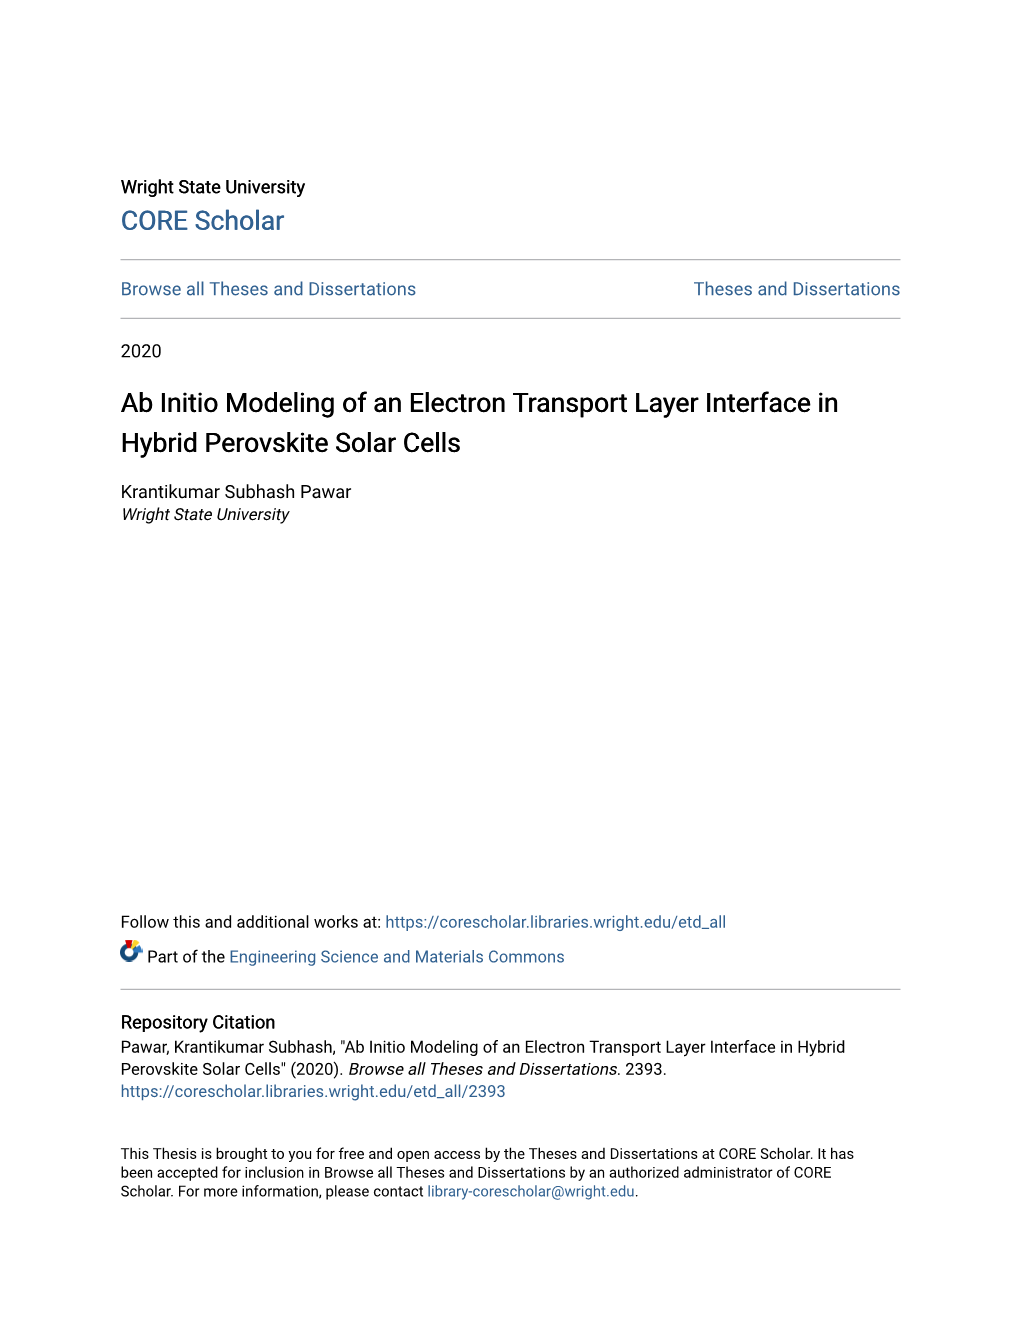 Ab Initio Modeling of an Electron Transport Layer Interface in Hybrid Perovskite Solar Cells